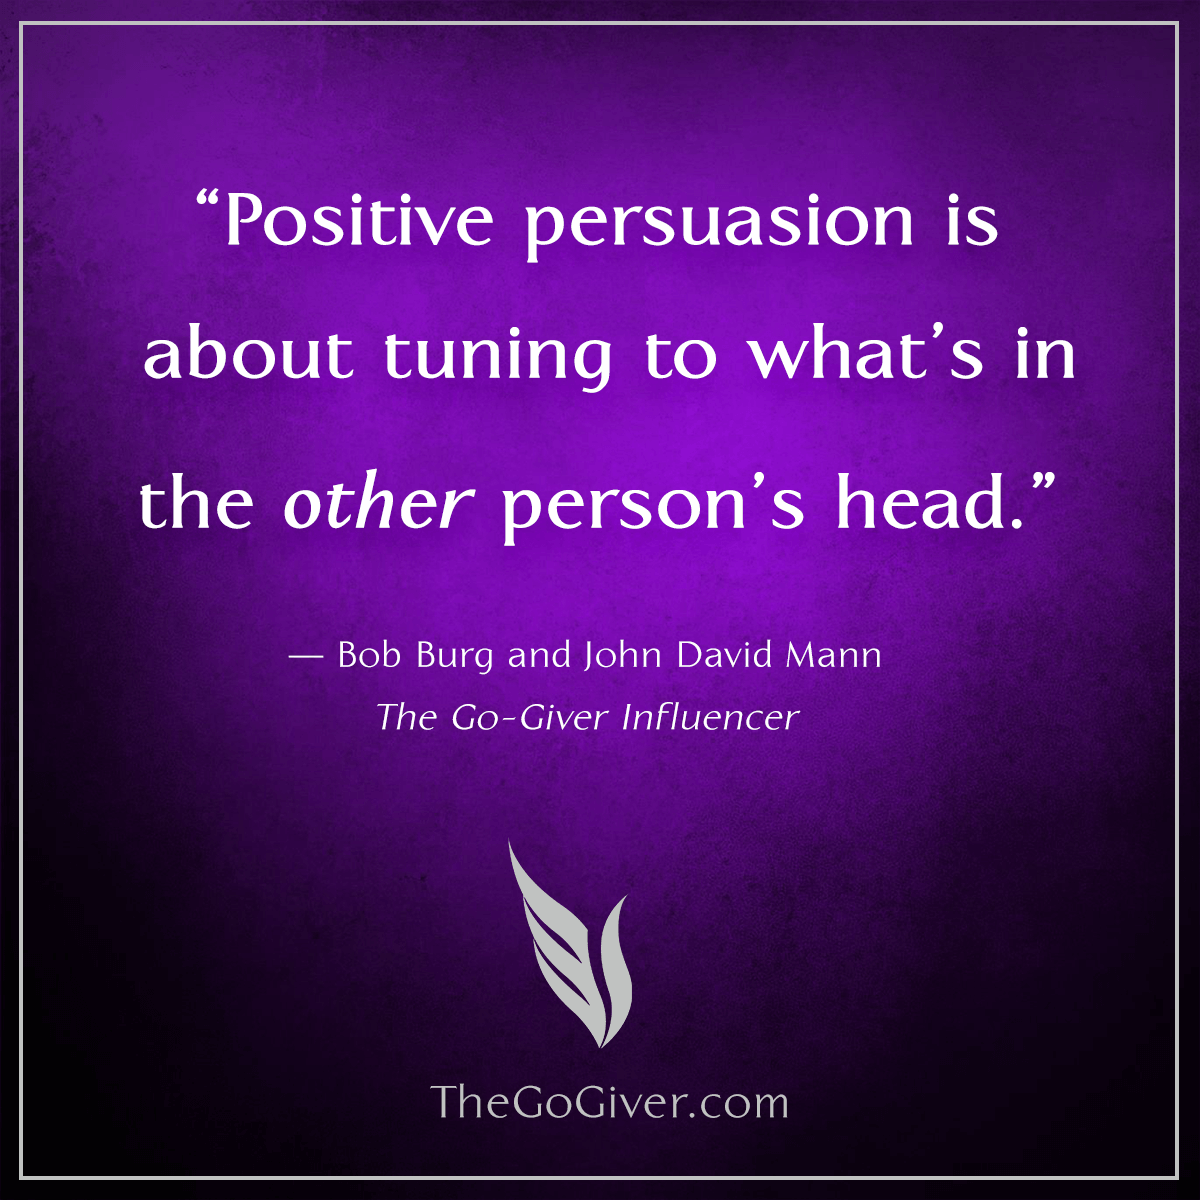 Positive Persuasion - The Go-Giver Influencer